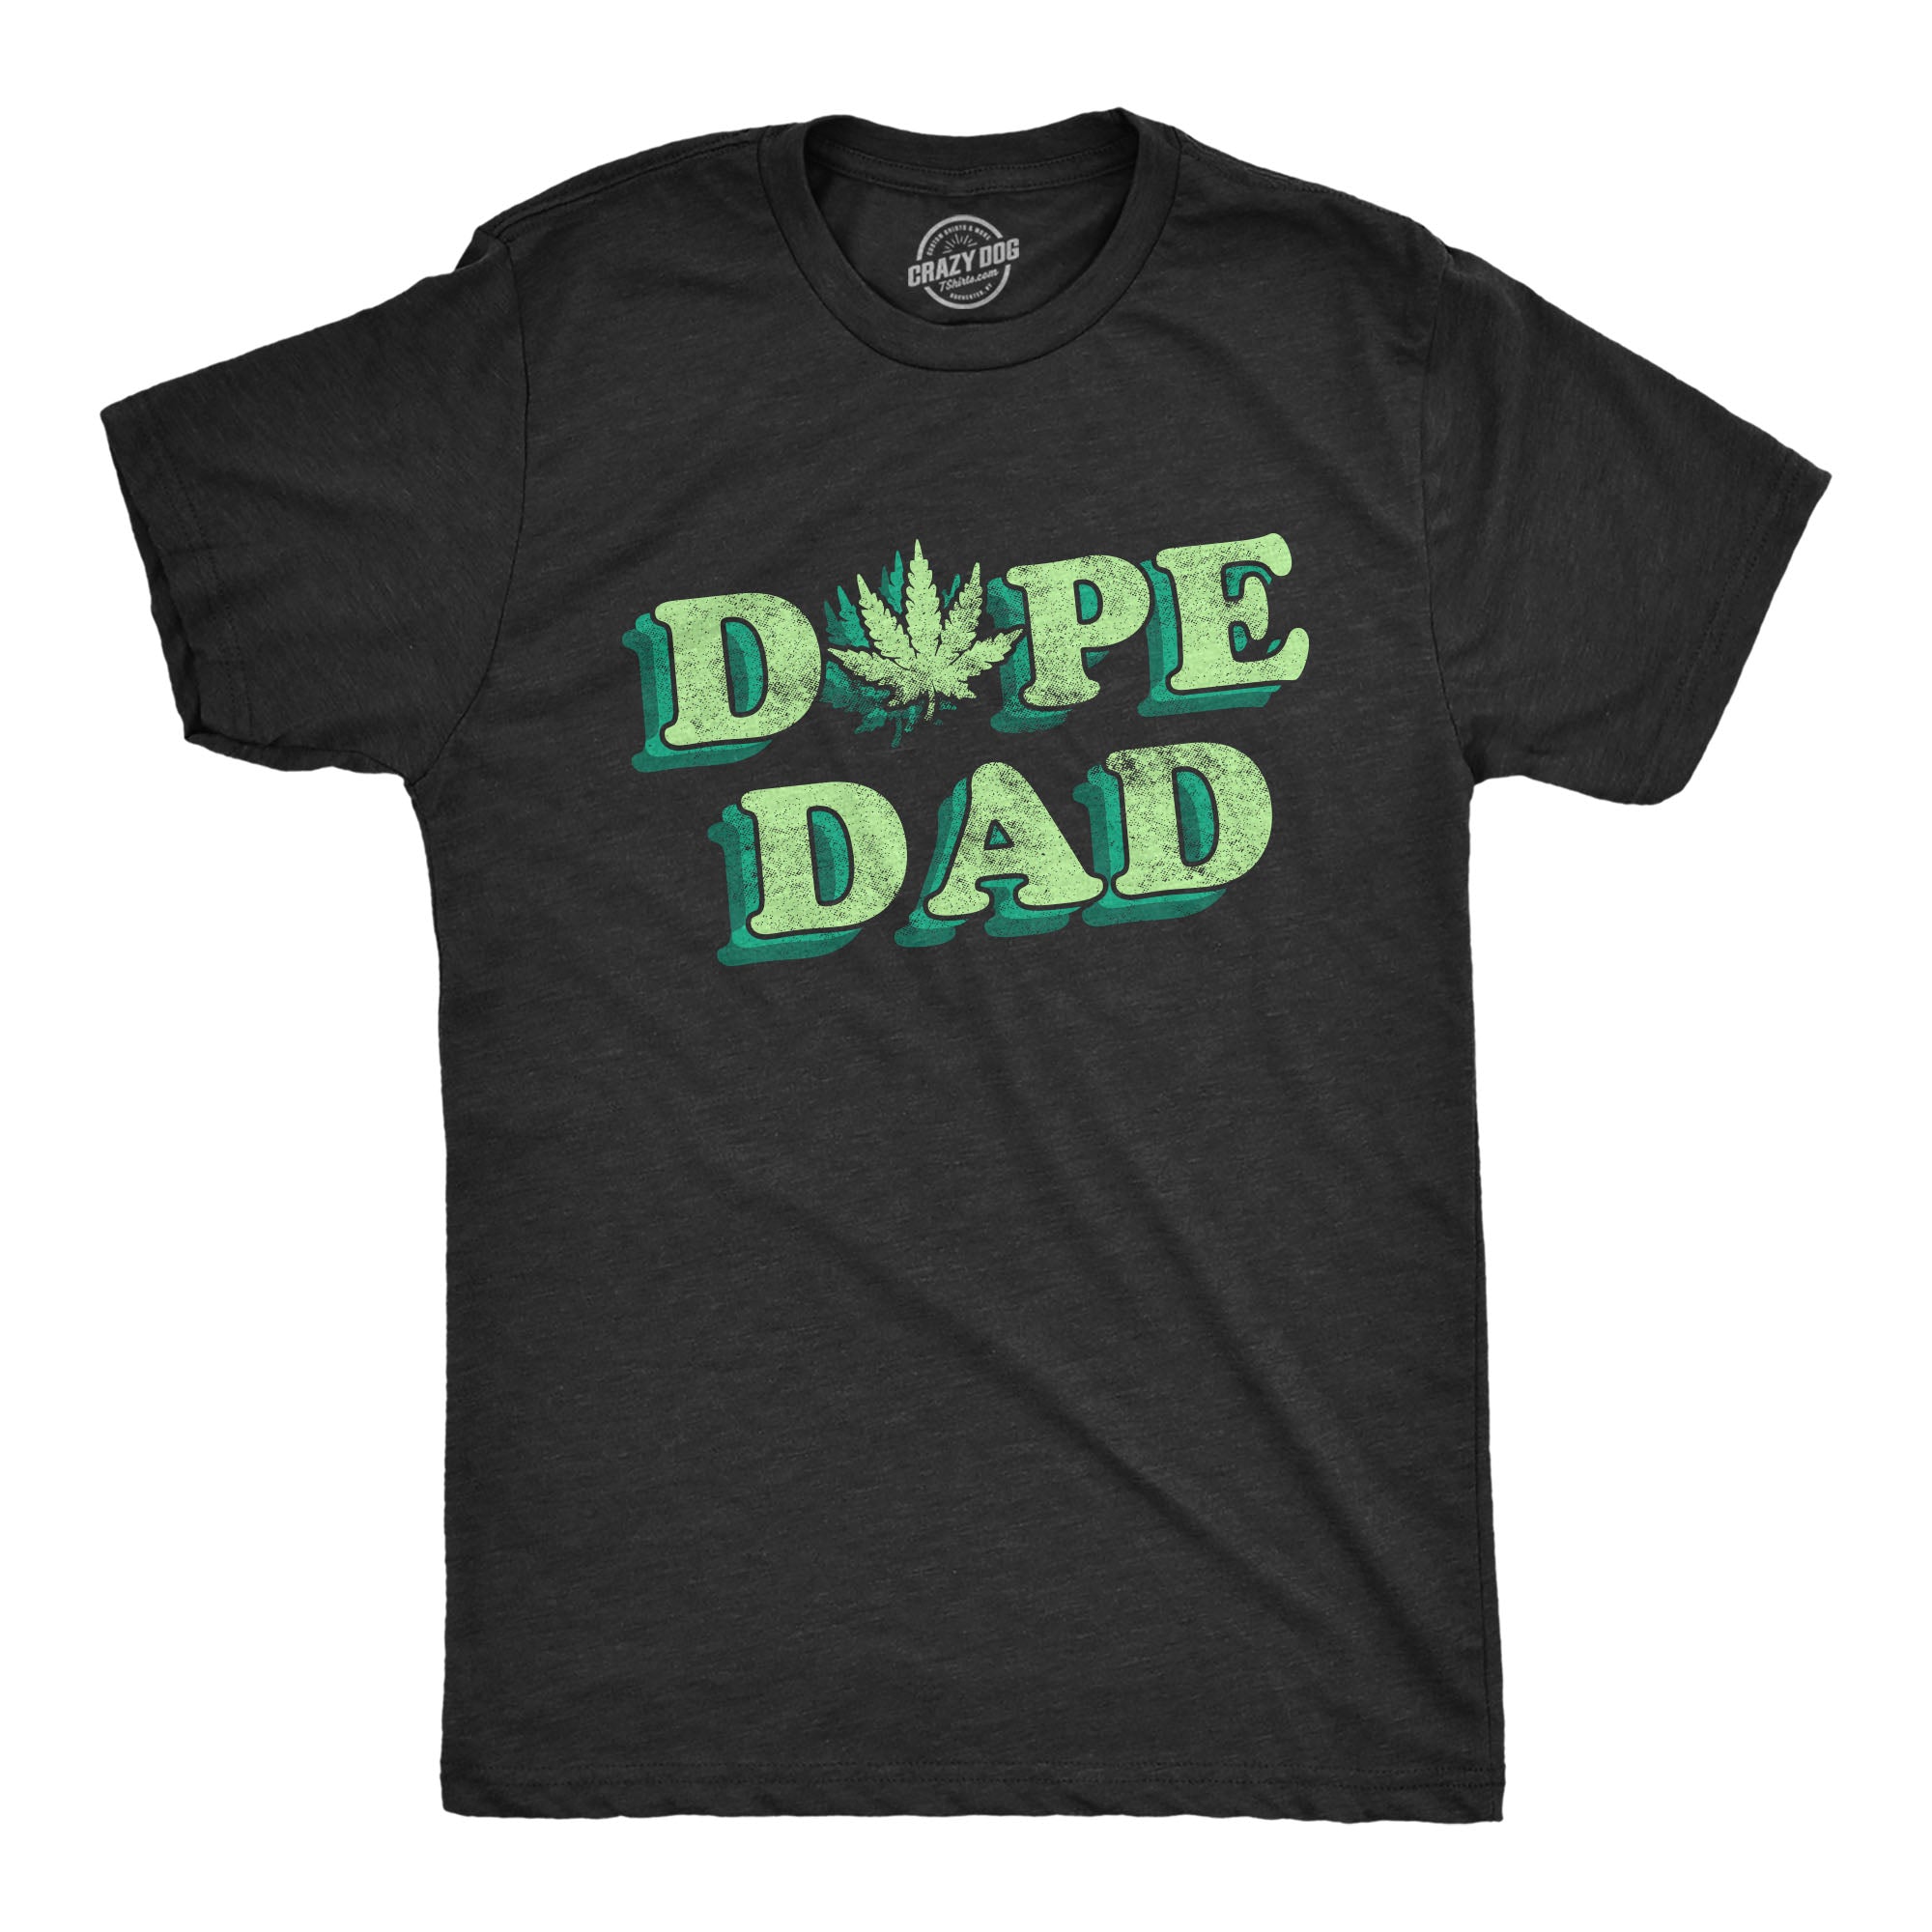 Funny Heather Black Dope Dad Mens T Shirt Nerdy 420 Sarcastic Tee